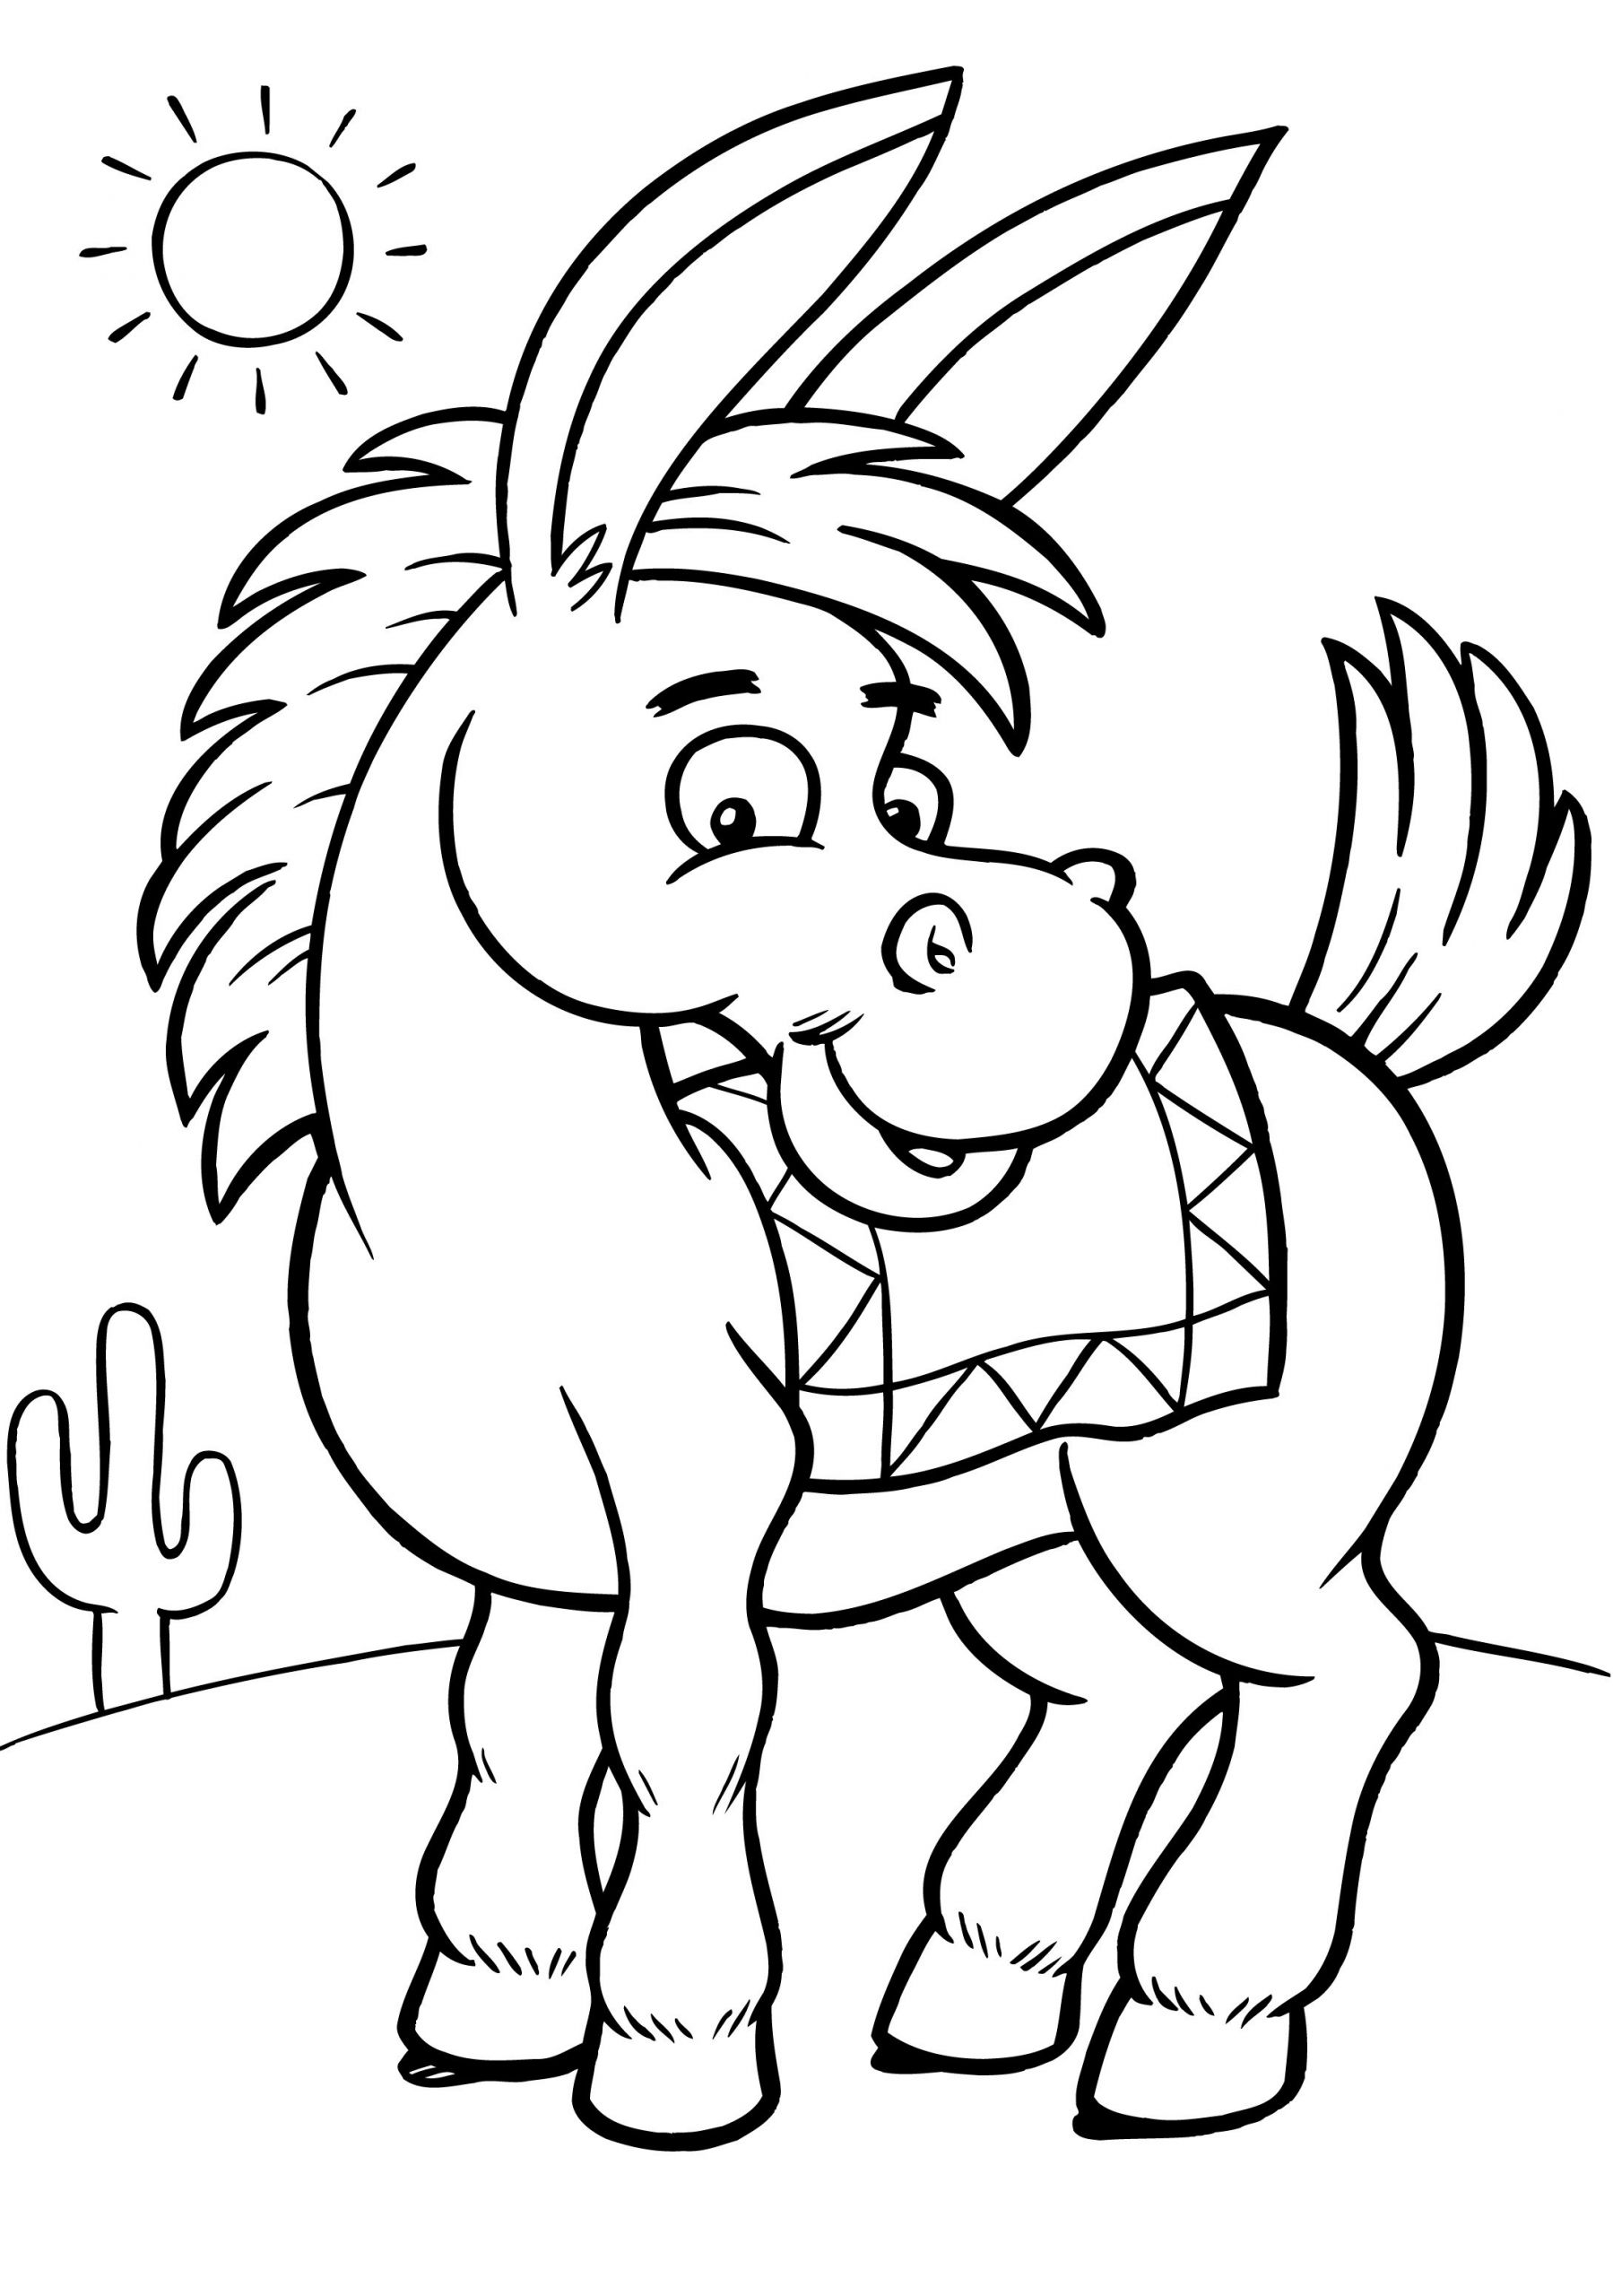 Online Coloring For Kids
 Free Printable Donkey Coloring Pages For Kids